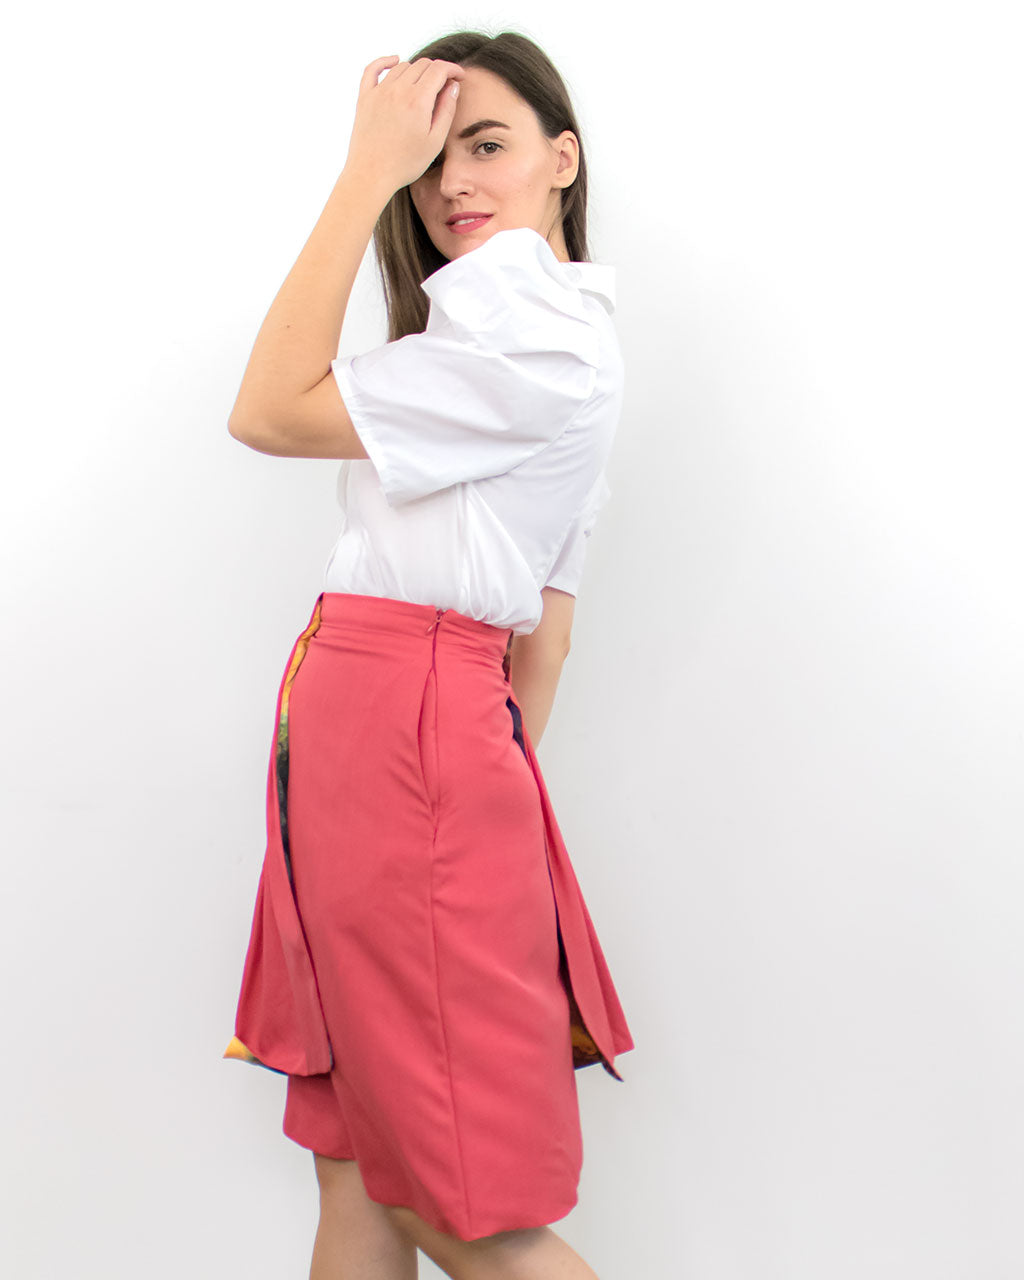 Luxury designer high waisted red double layer flowy flare straight skirt ADKN ethically made in UK from sustainable materials